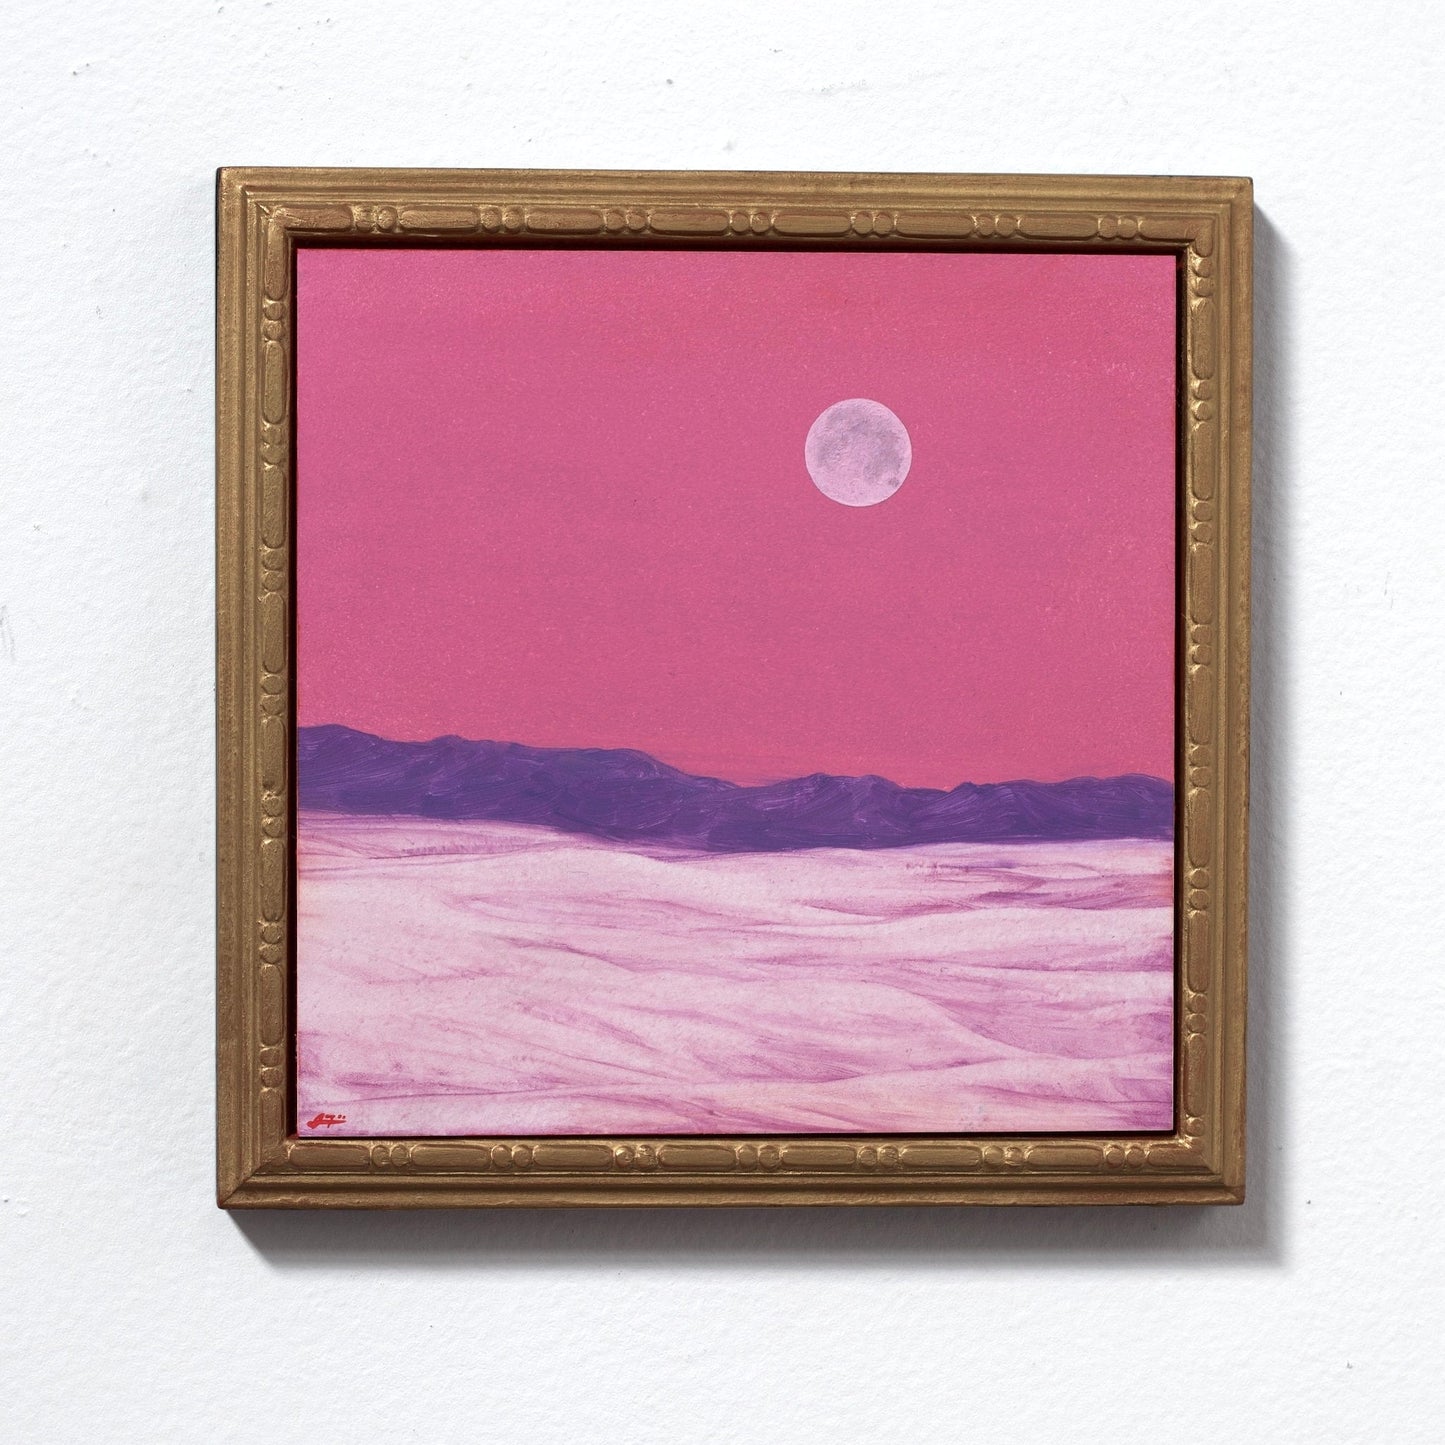 White Sands No.2 - Original Southwest Landscape Oil Painting - 8 x 8 inches in handmade frame